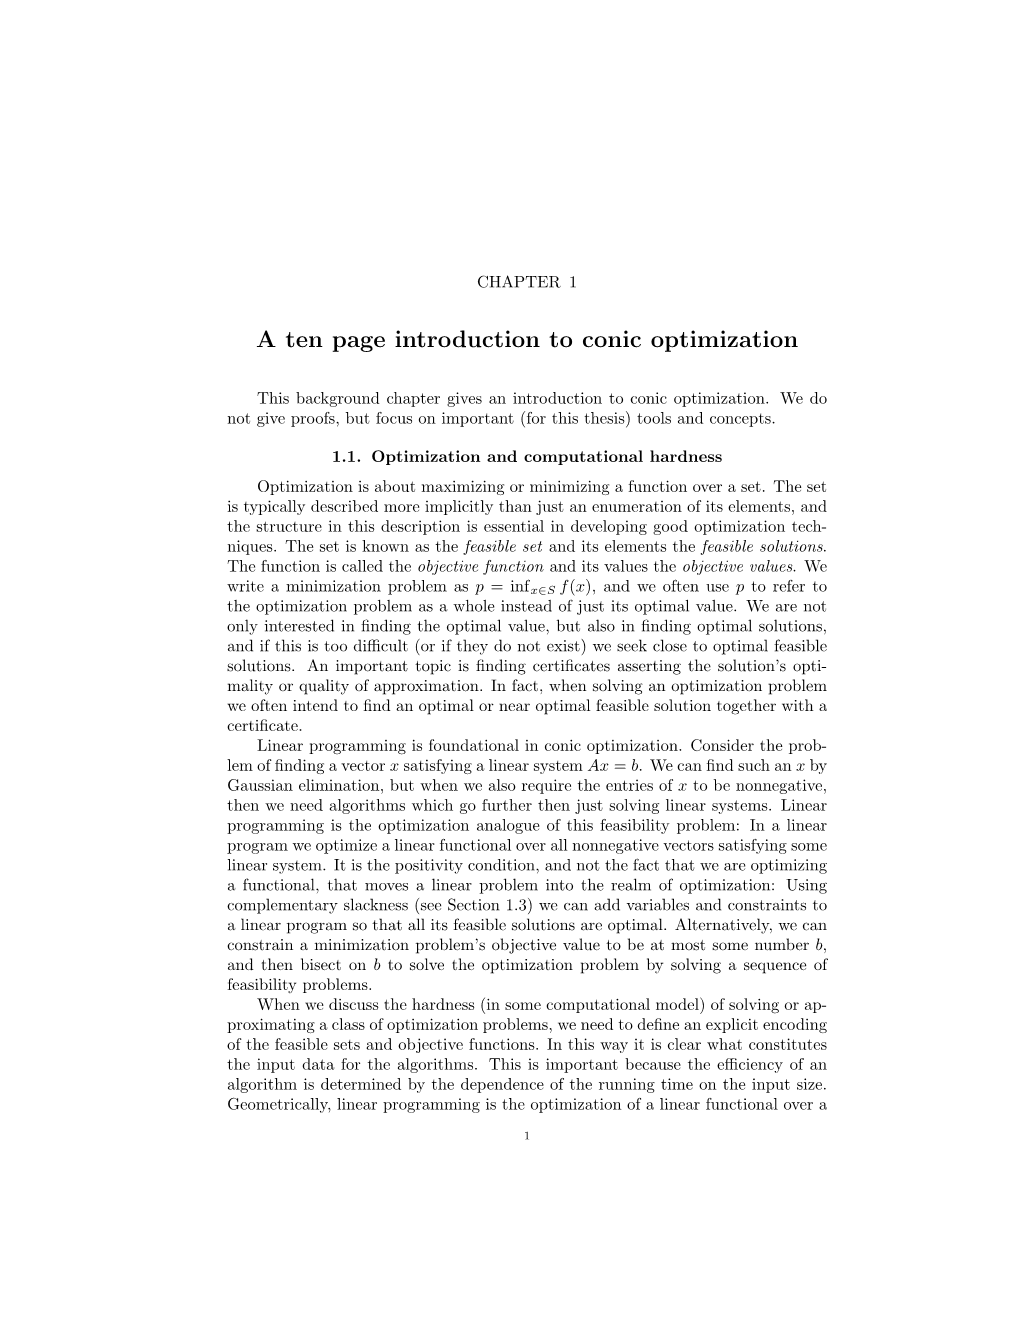 A Ten Page Introduction to Conic Optimization, 2015